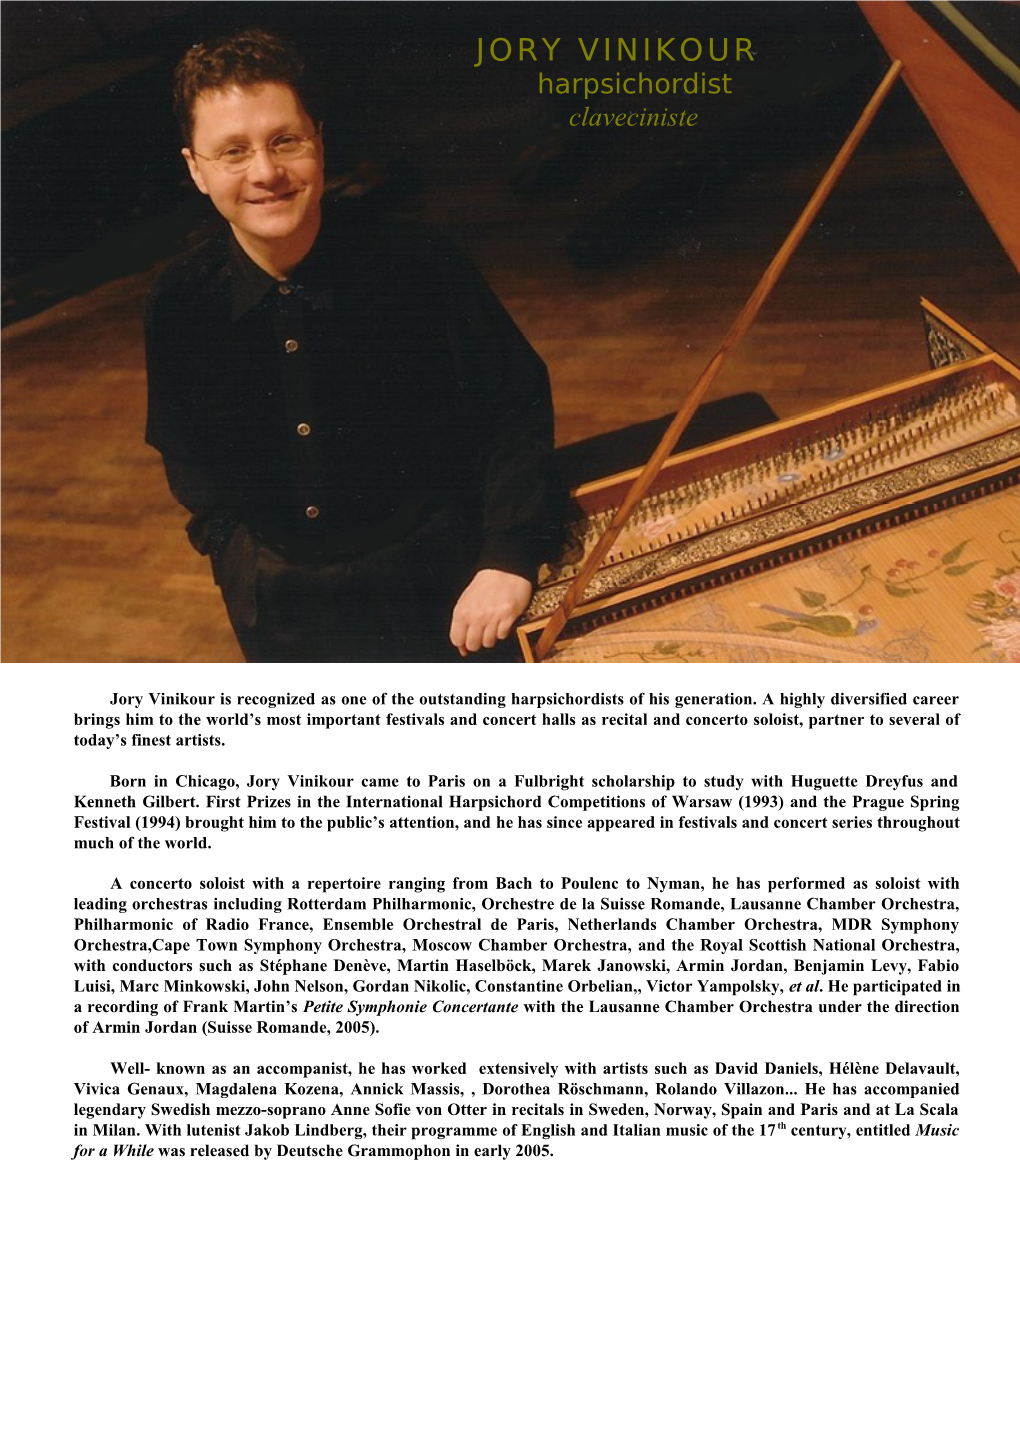 Jory Vinikour Is Recognized As One of the Outstanding Harpsichordists of His Generation